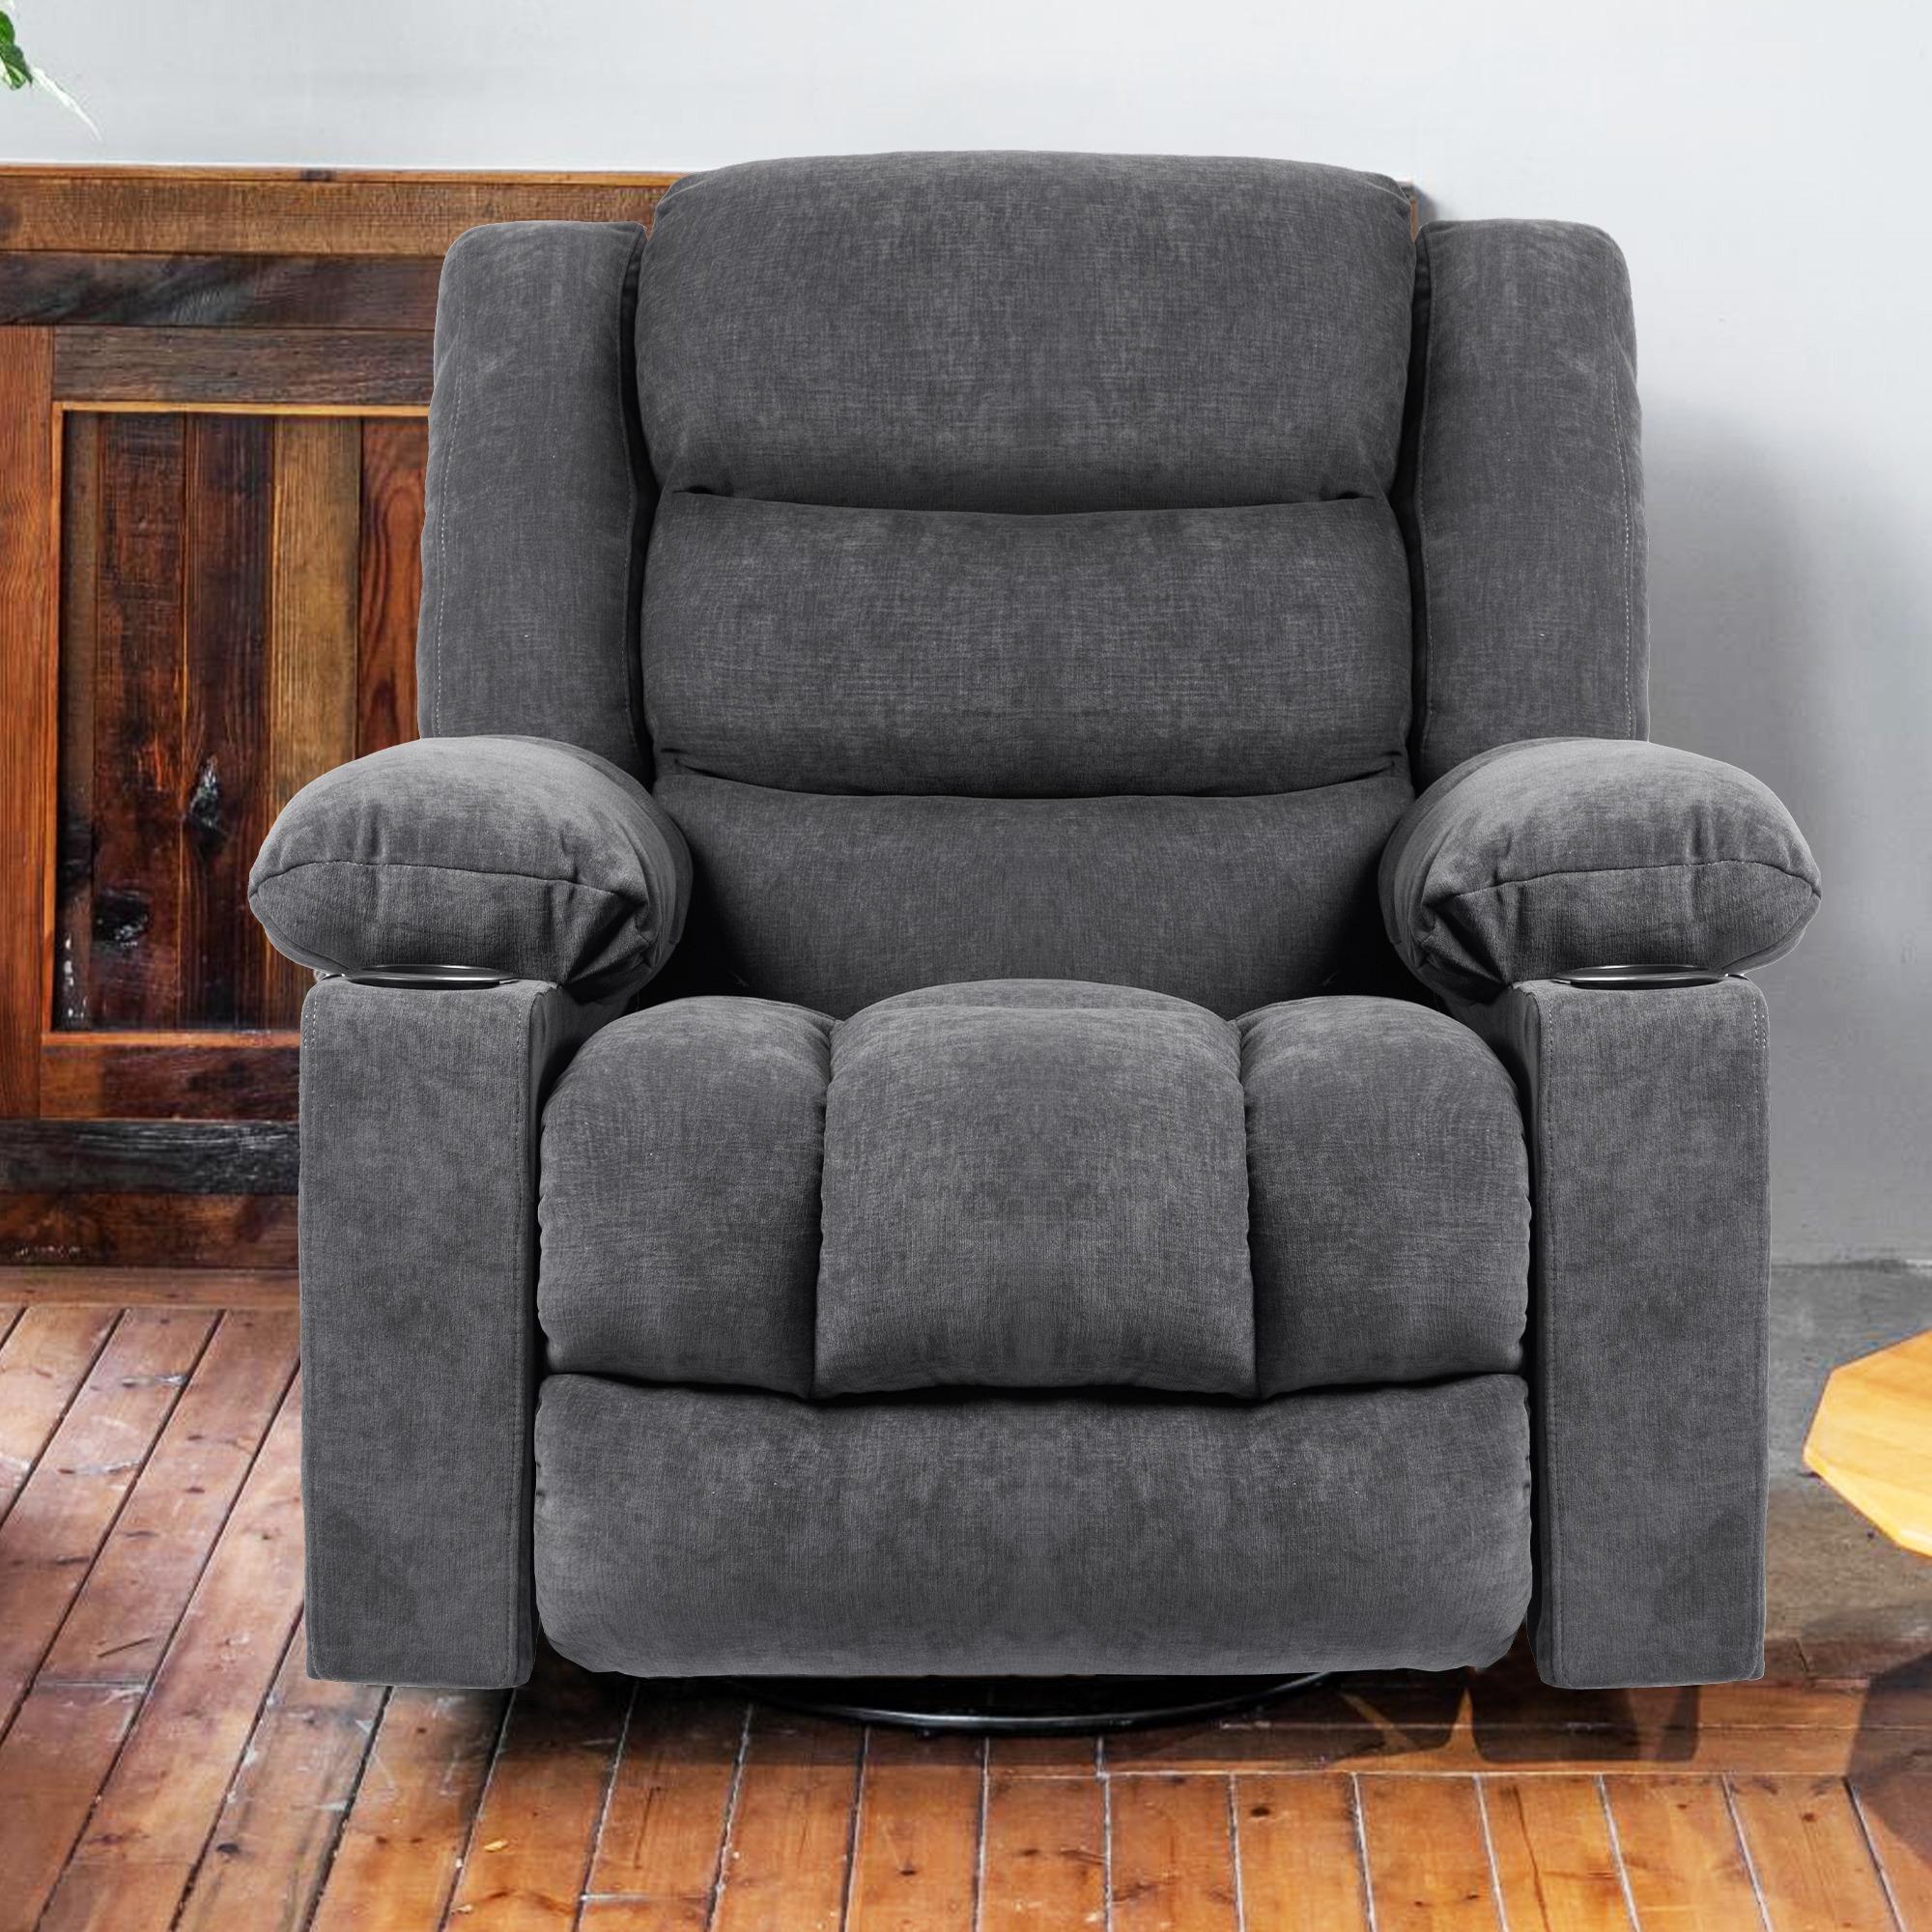 Power Lift Recliner Chair Breath Leather Electric Recliner សម្រាប់មនុស្សចាស់